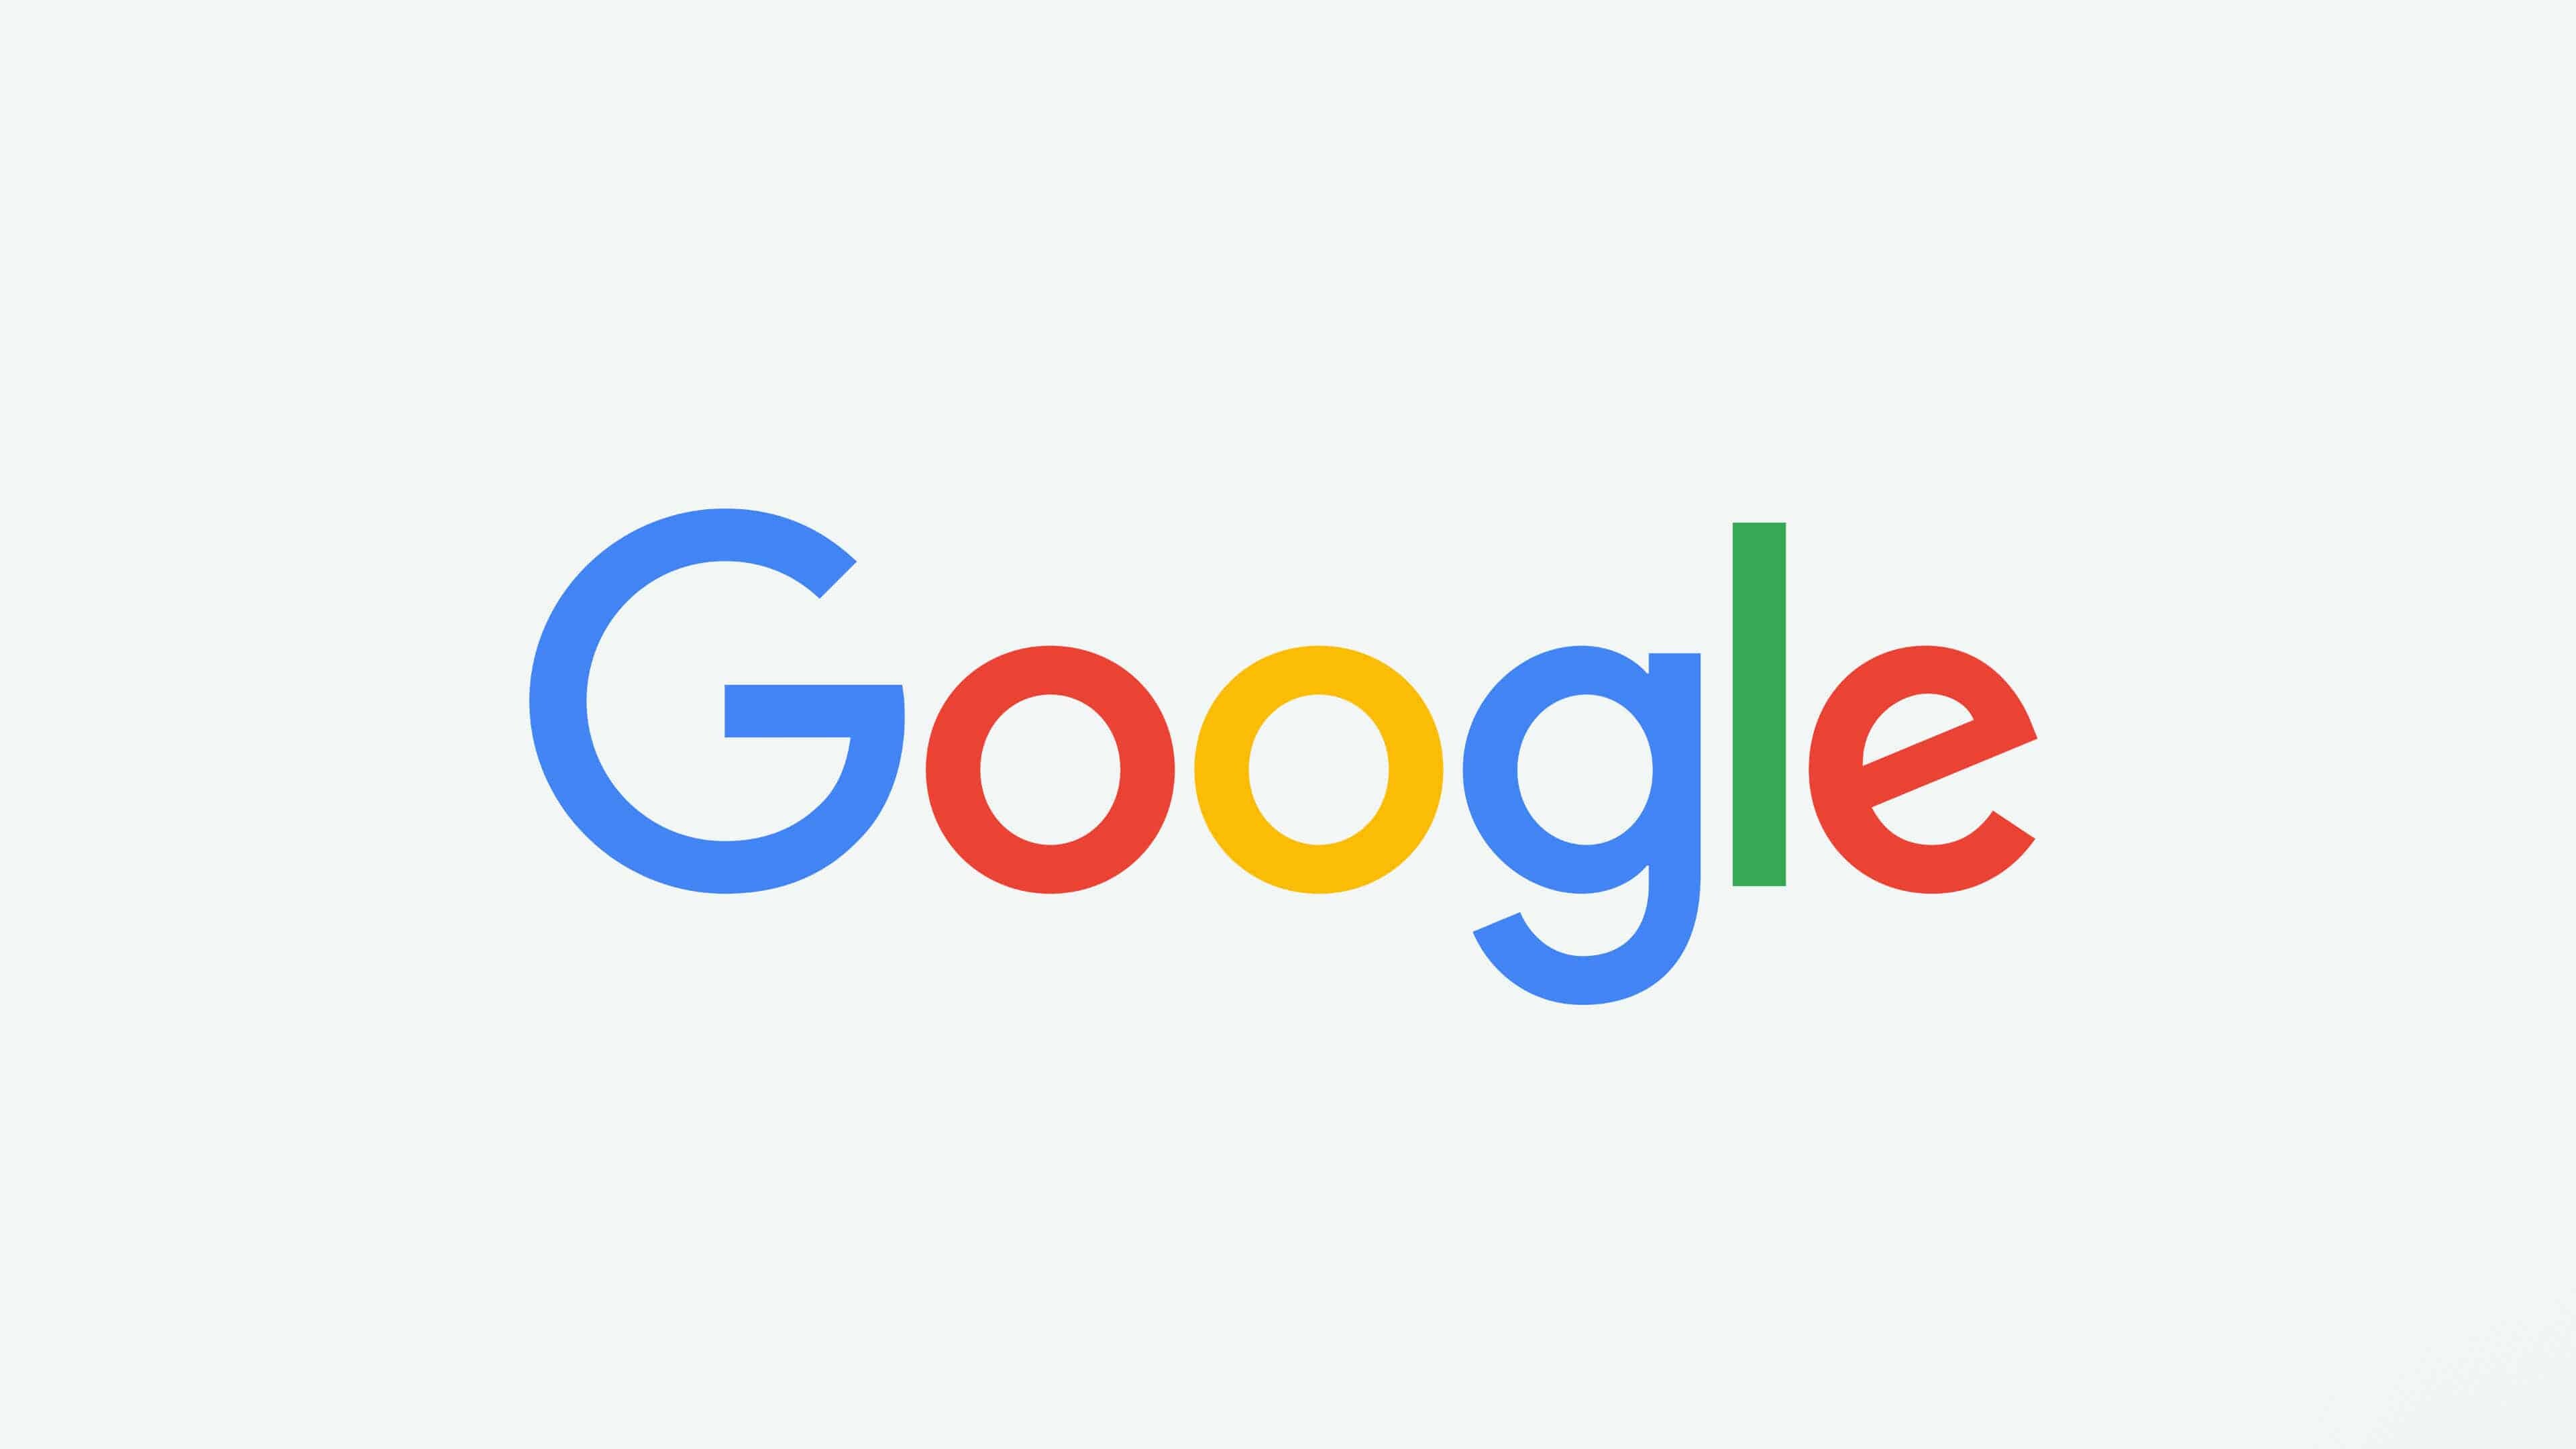 Google: Was founded in 1998 by Larry Page and Sergey Brin. 3840x2160 4K Wallpaper.